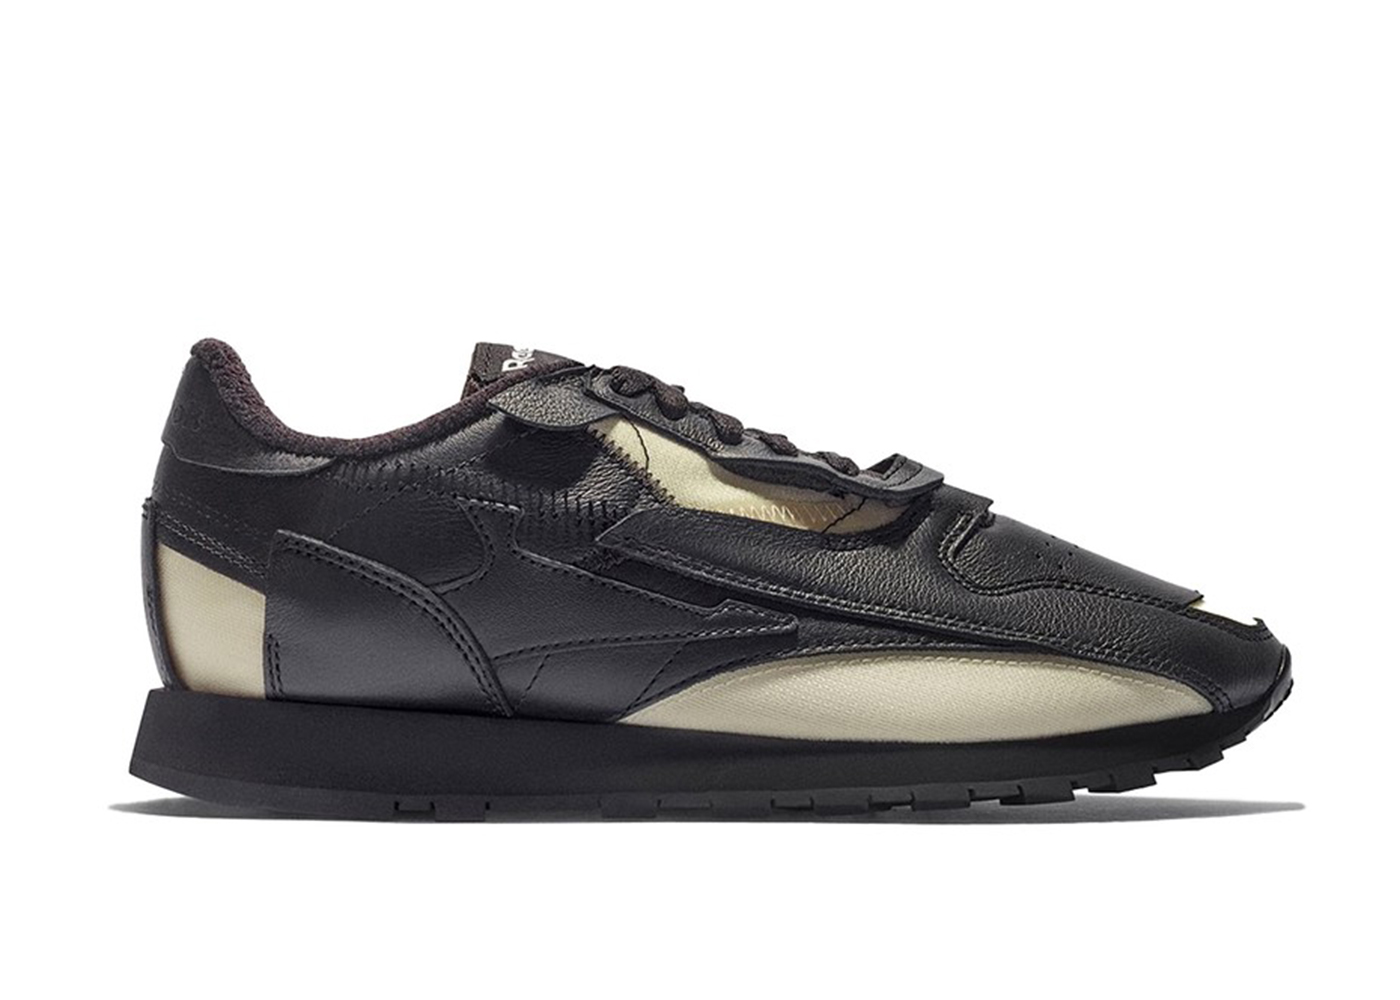 Reebok Classic Leather Re-Co Maison Margiela Project 0 'Memory Of